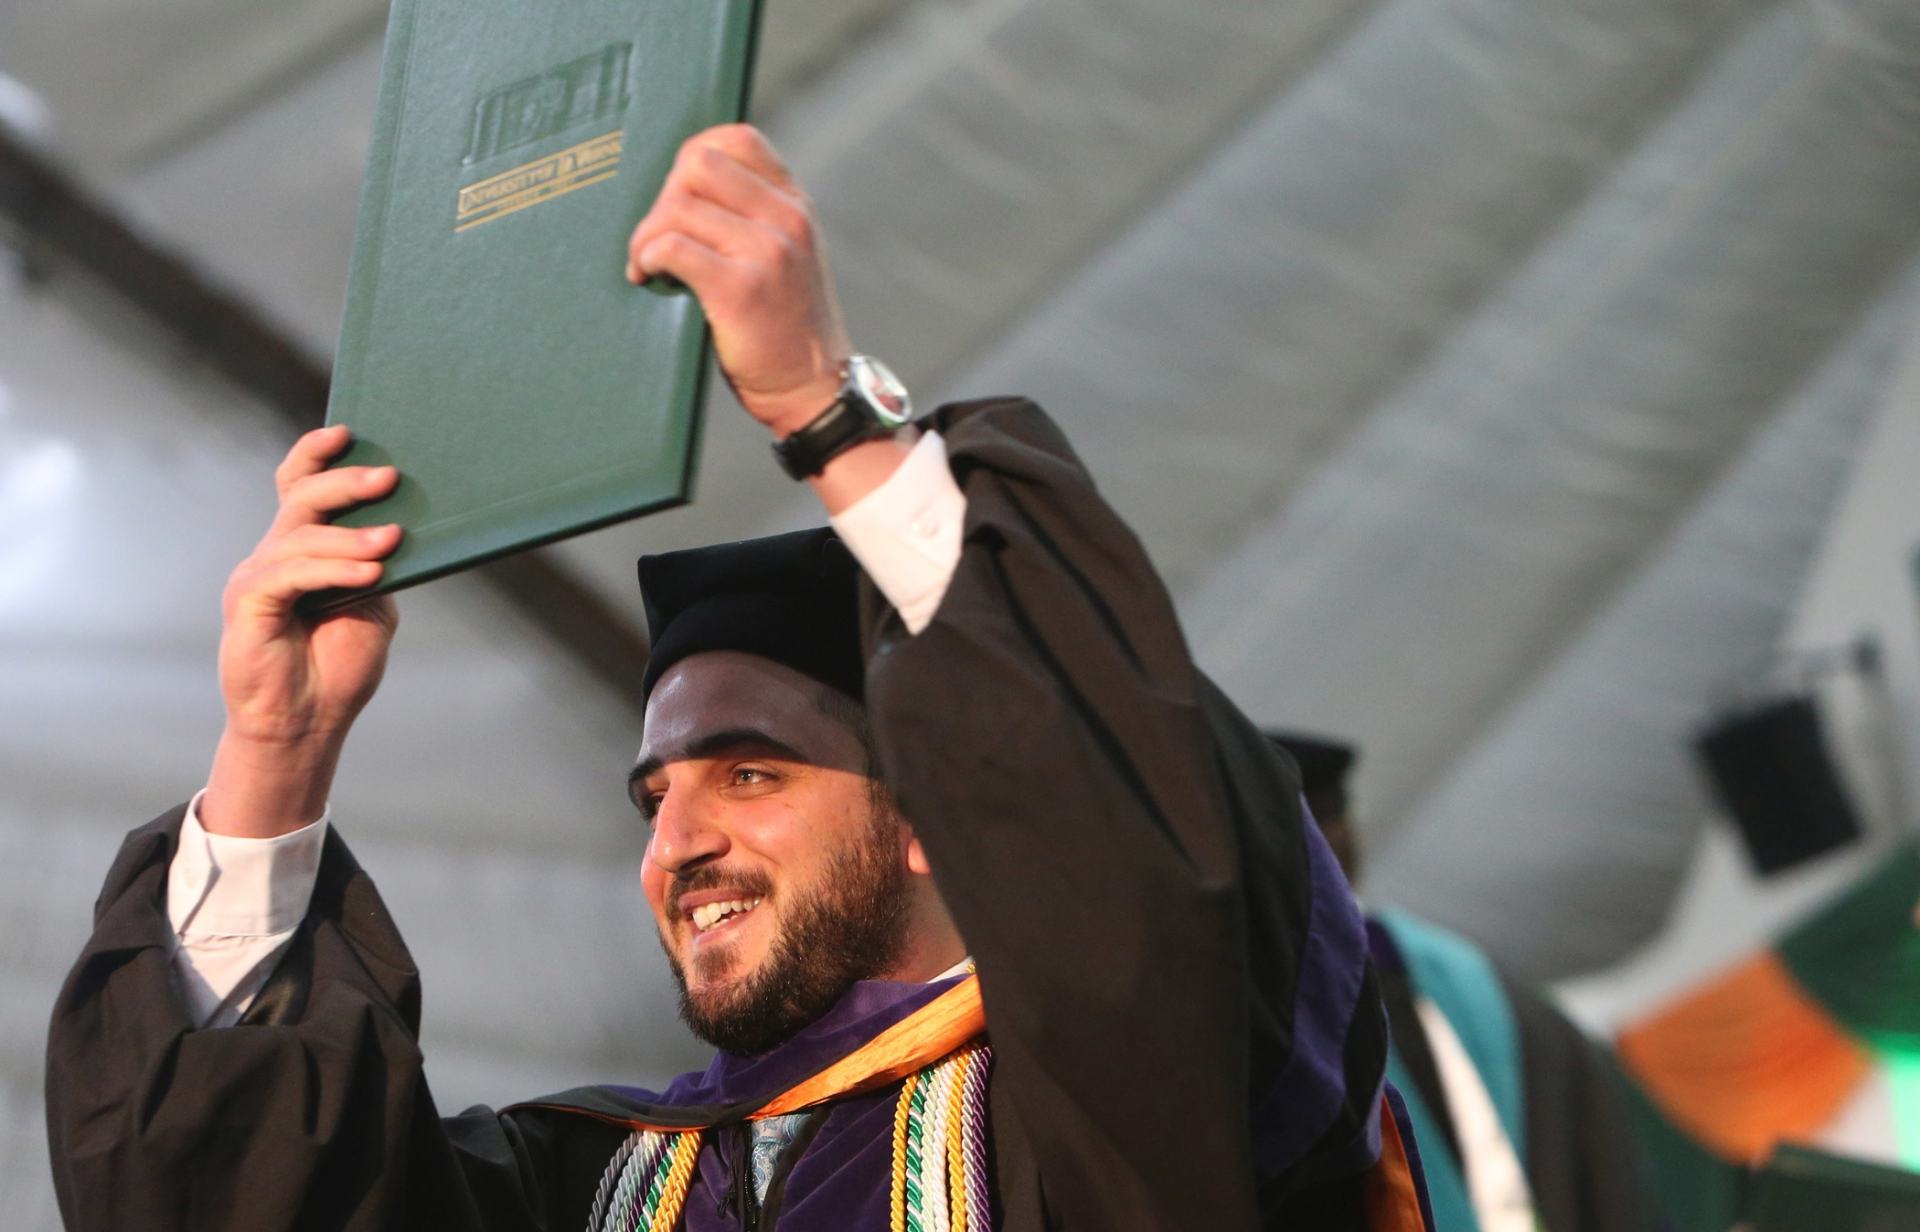 A College of Law graduate smiles onstage